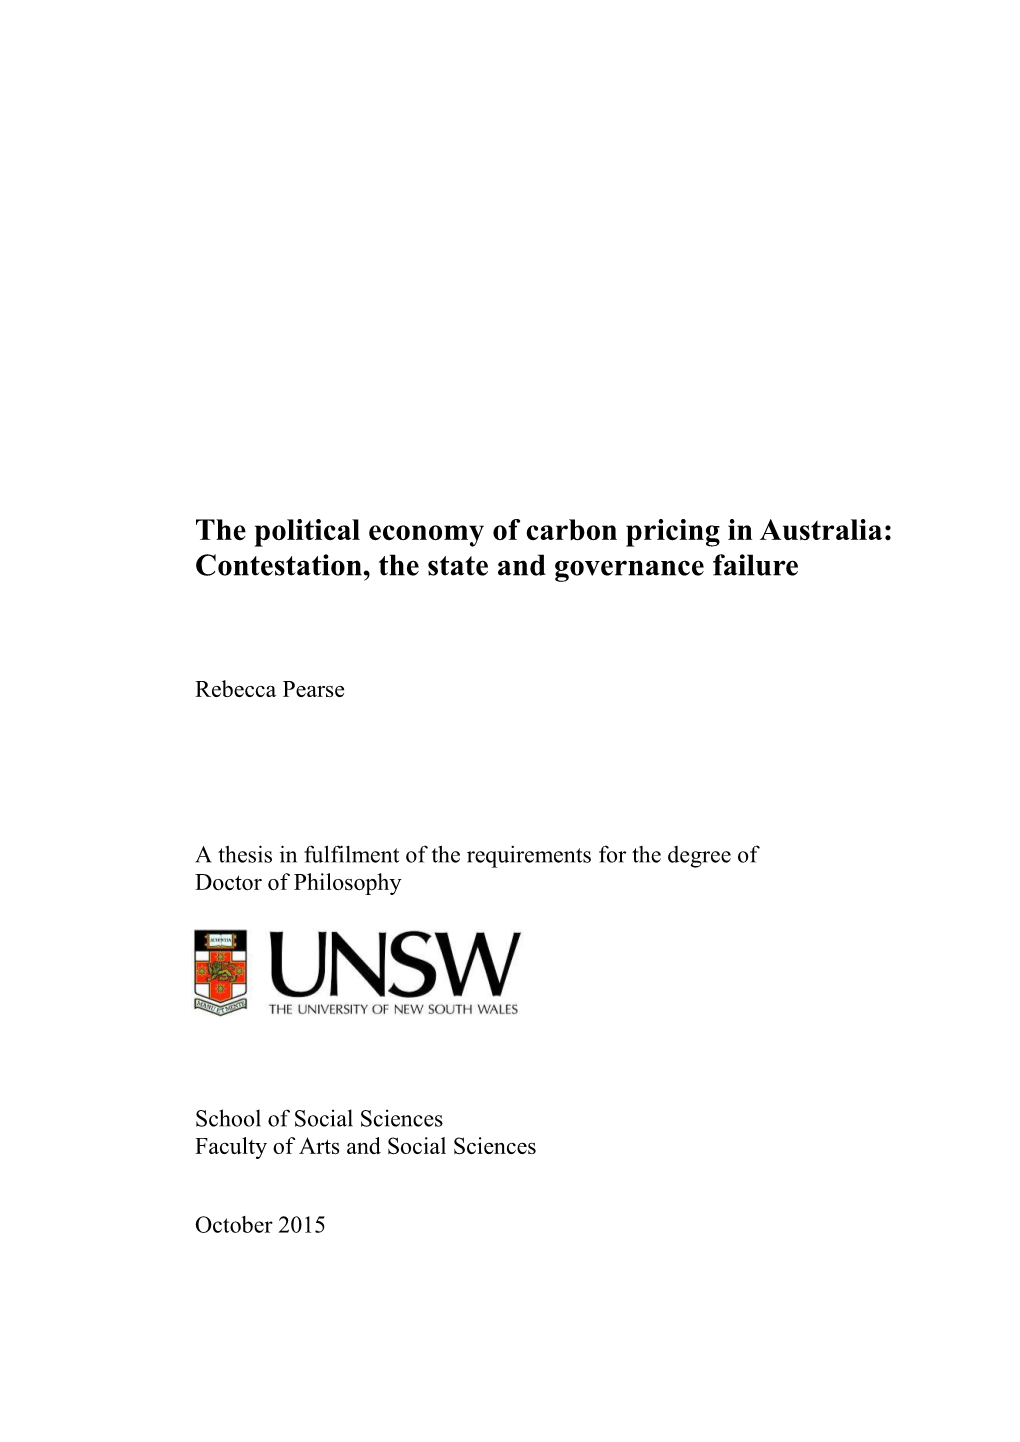 The Political Economy of Carbon Pricing in Australia: Contestation, the State and Governance Failure